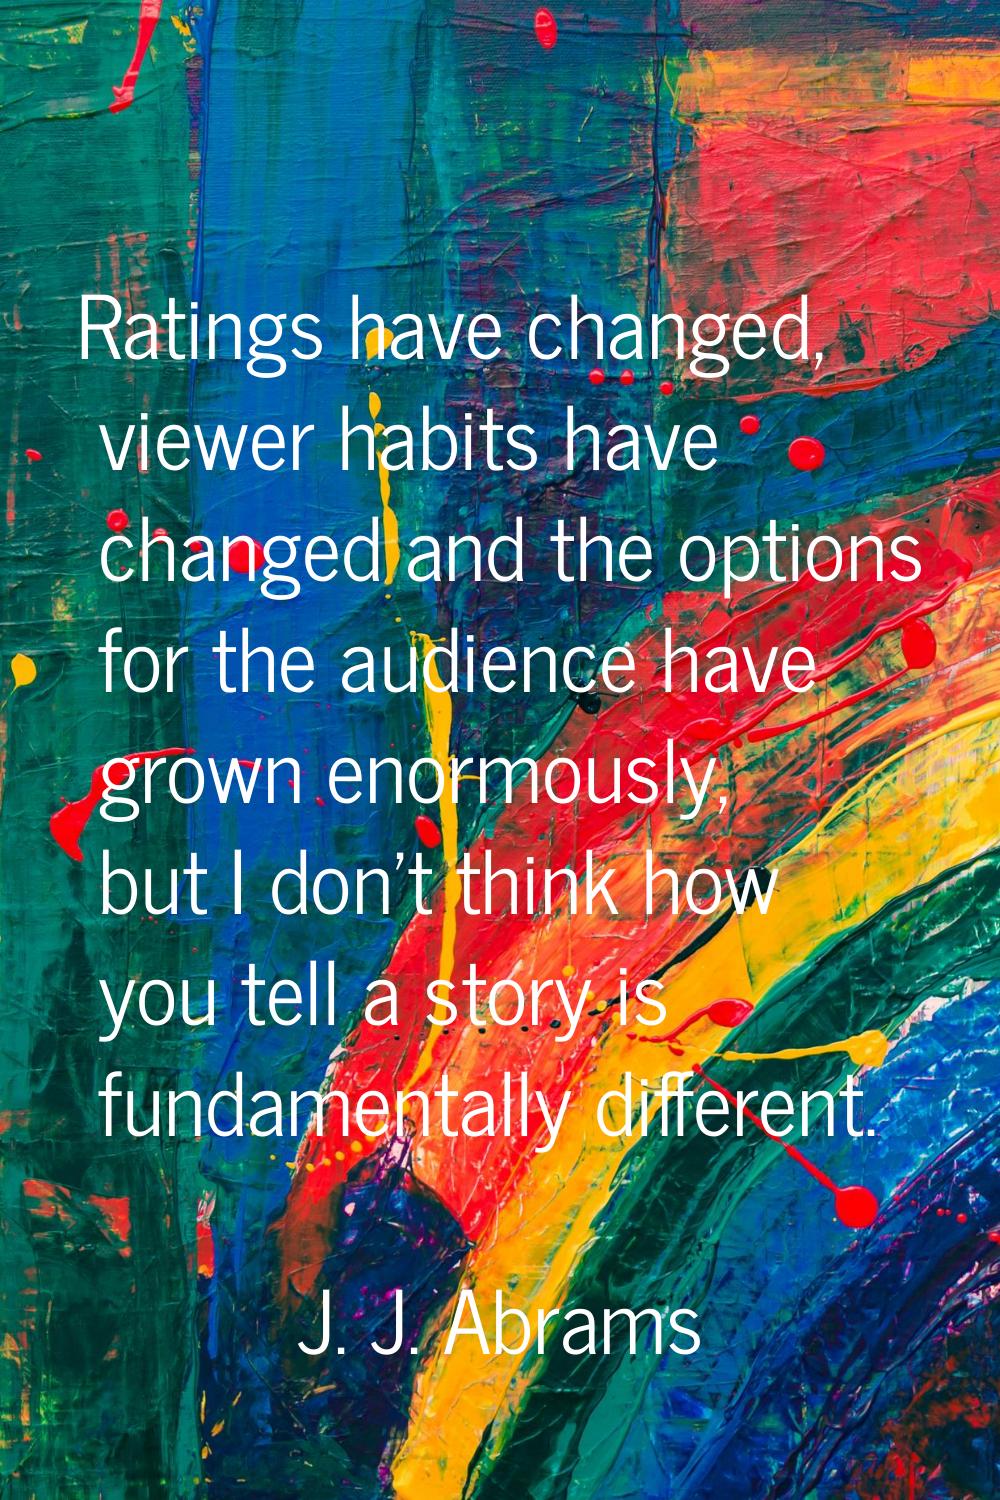 Ratings have changed, viewer habits have changed and the options for the audience have grown enormo